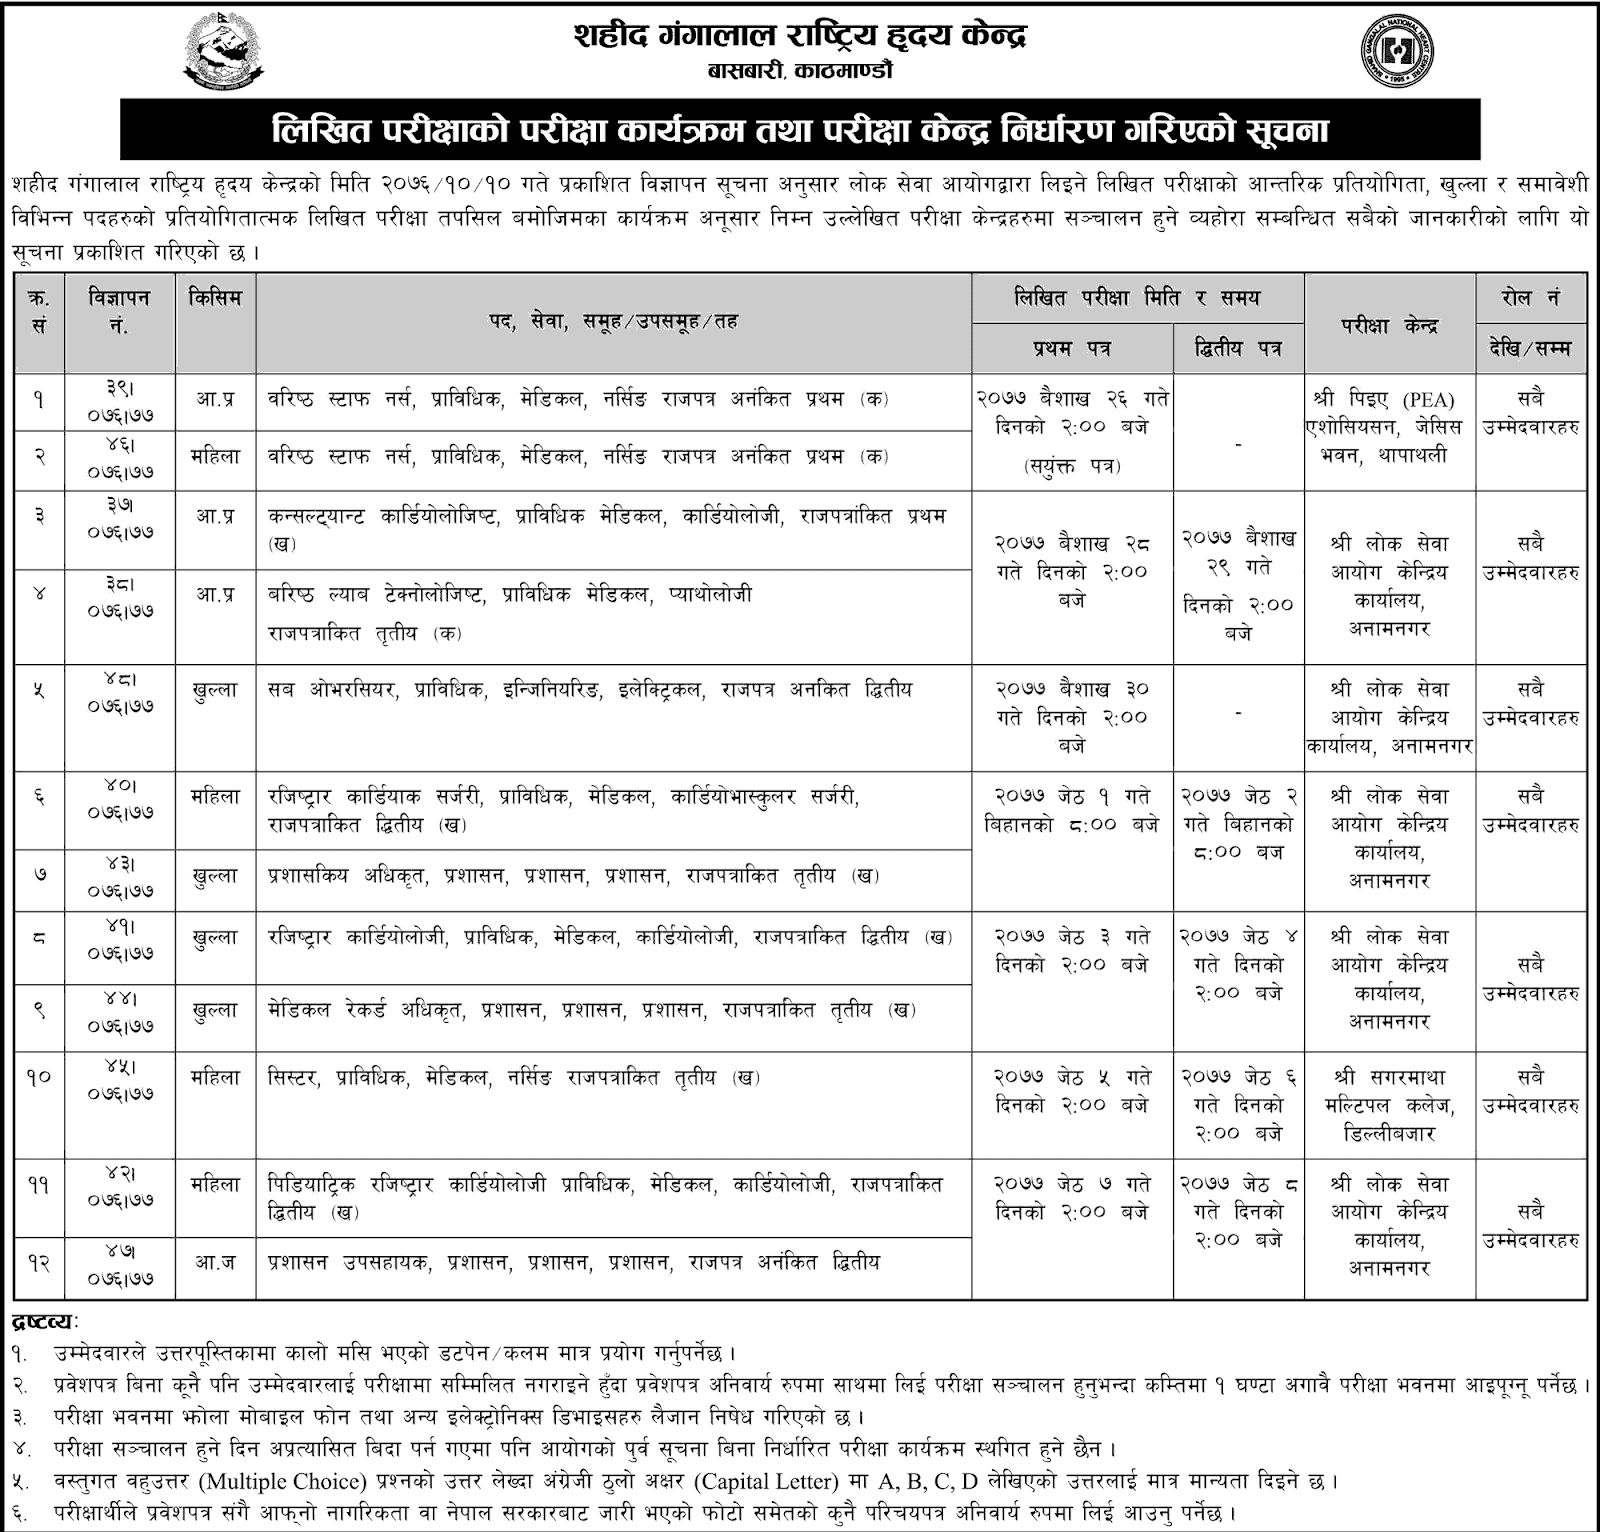 Shahid Gangalal National Heart Center Written Exam Routine and Centers